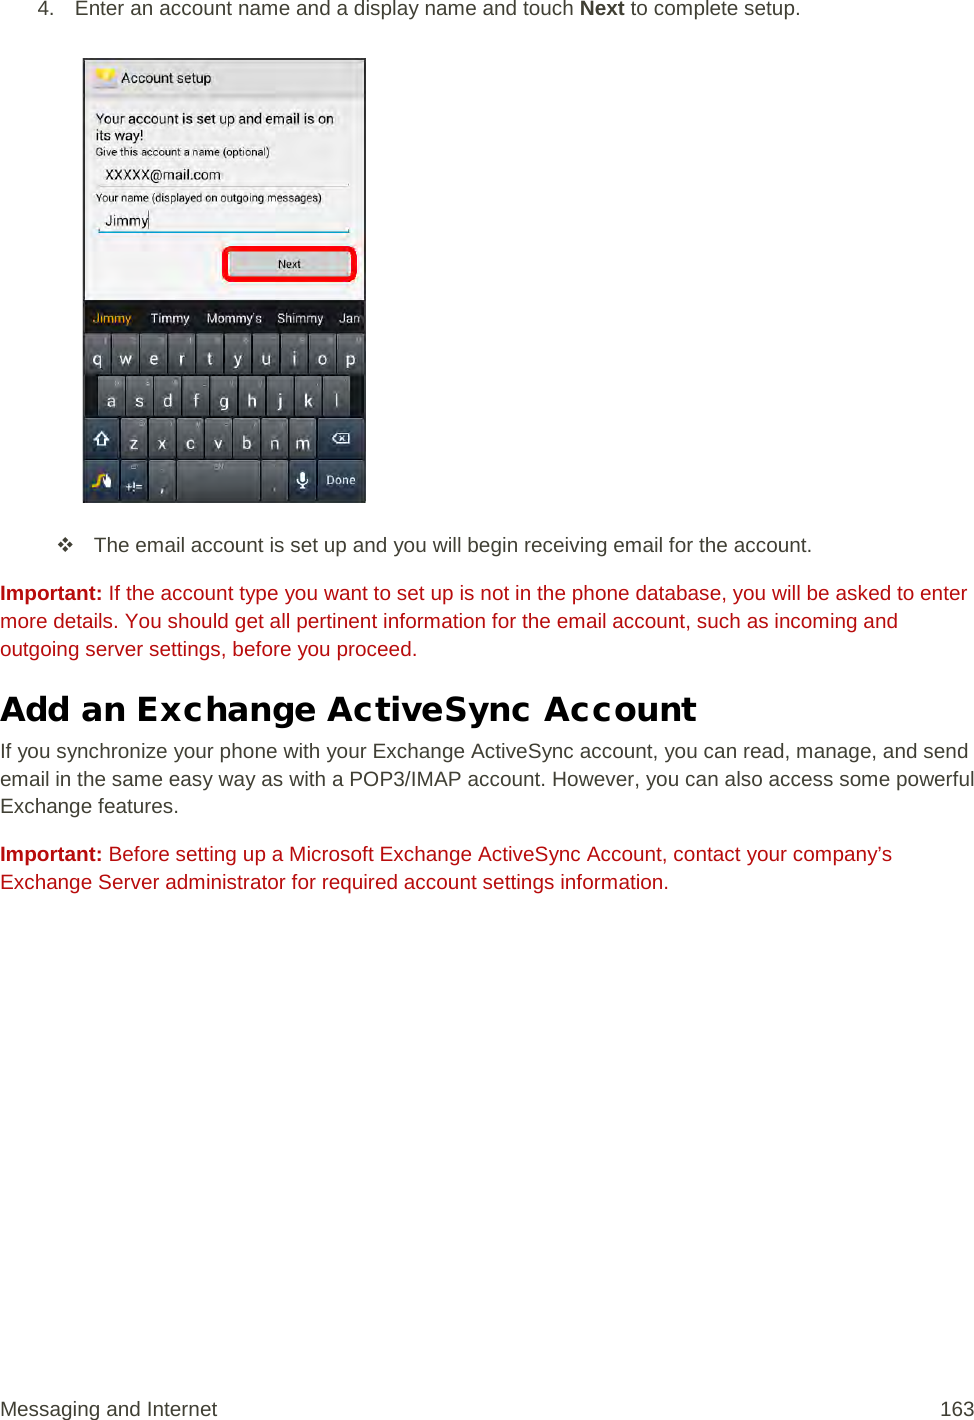 4. Enter an account name and a display name and touch Next to complete setup.    The email account is set up and you will begin receiving email for the account. Important: If the account type you want to set up is not in the phone database, you will be asked to enter more details. You should get all pertinent information for the email account, such as incoming and outgoing server settings, before you proceed. Add an Exchange ActiveSync Account If you synchronize your phone with your Exchange ActiveSync account, you can read, manage, and send email in the same easy way as with a POP3/IMAP account. However, you can also access some powerful Exchange features.  Important: Before setting up a Microsoft Exchange ActiveSync Account, contact your company’s Exchange Server administrator for required account settings information. Messaging and Internet 163 